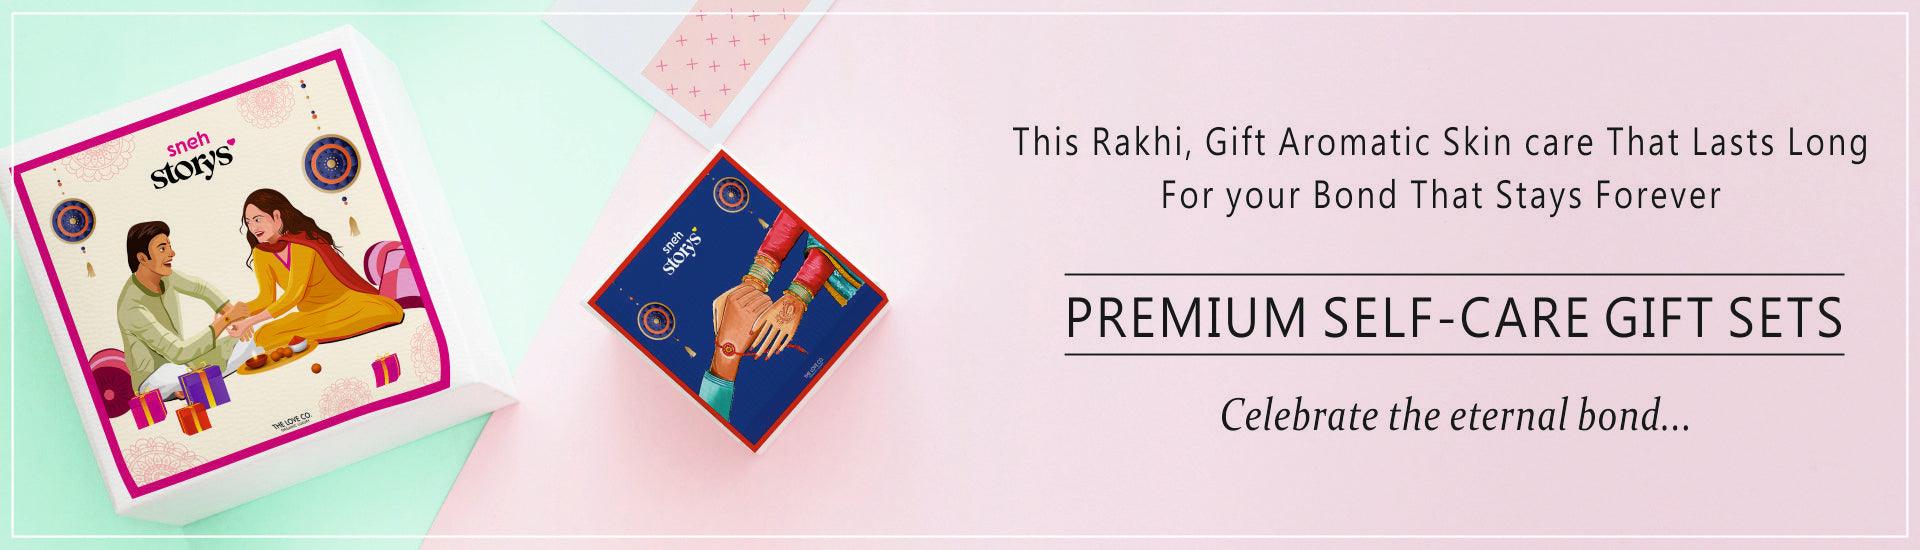 The Love Co" Presents "Sneh Storys": Elevating Rakhi Gifting Through Exquisite Gift Boxes